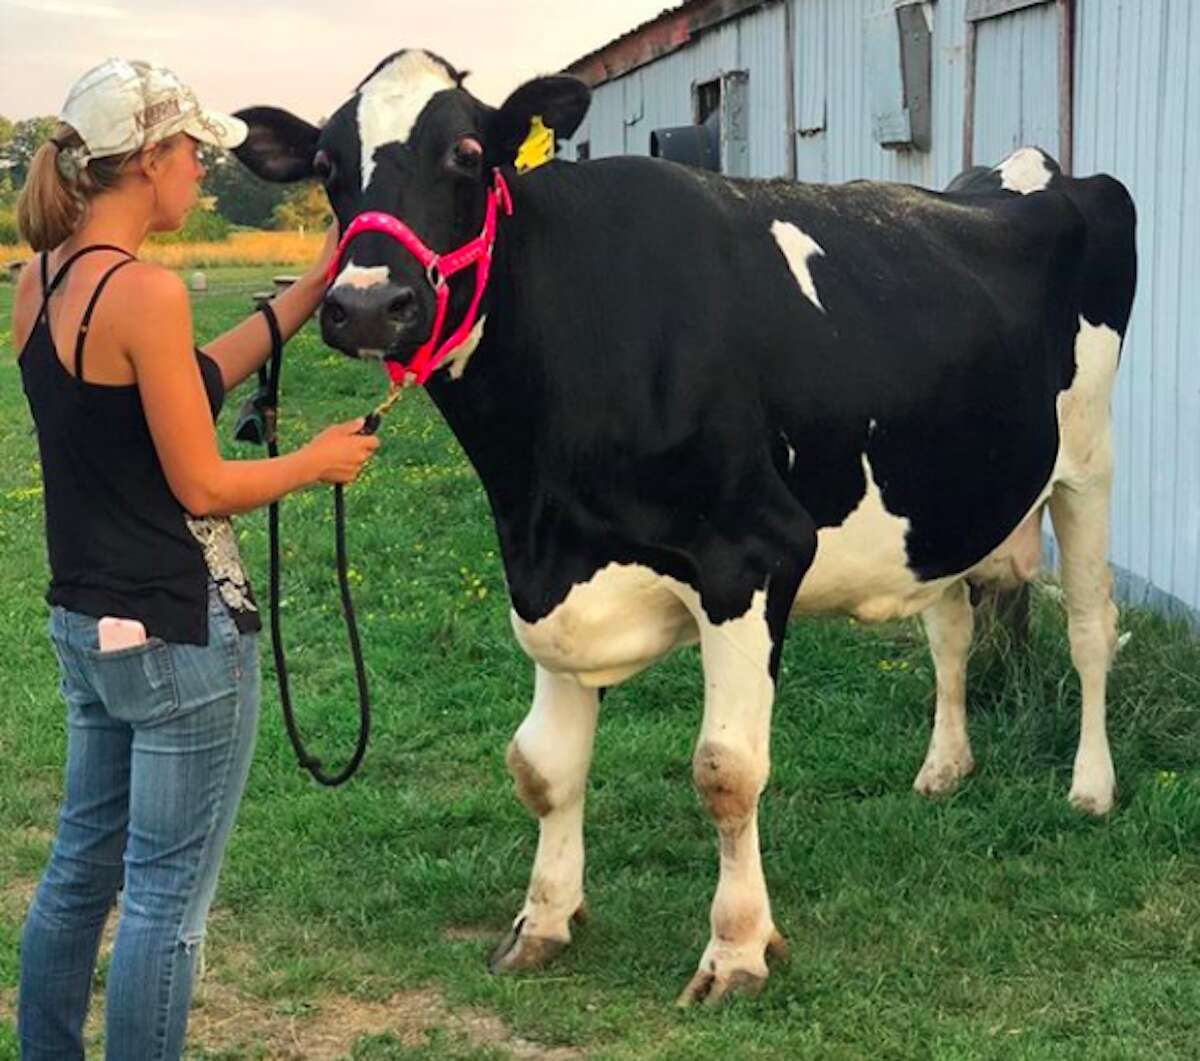 Blind cow arrives at sanctuary in Canada